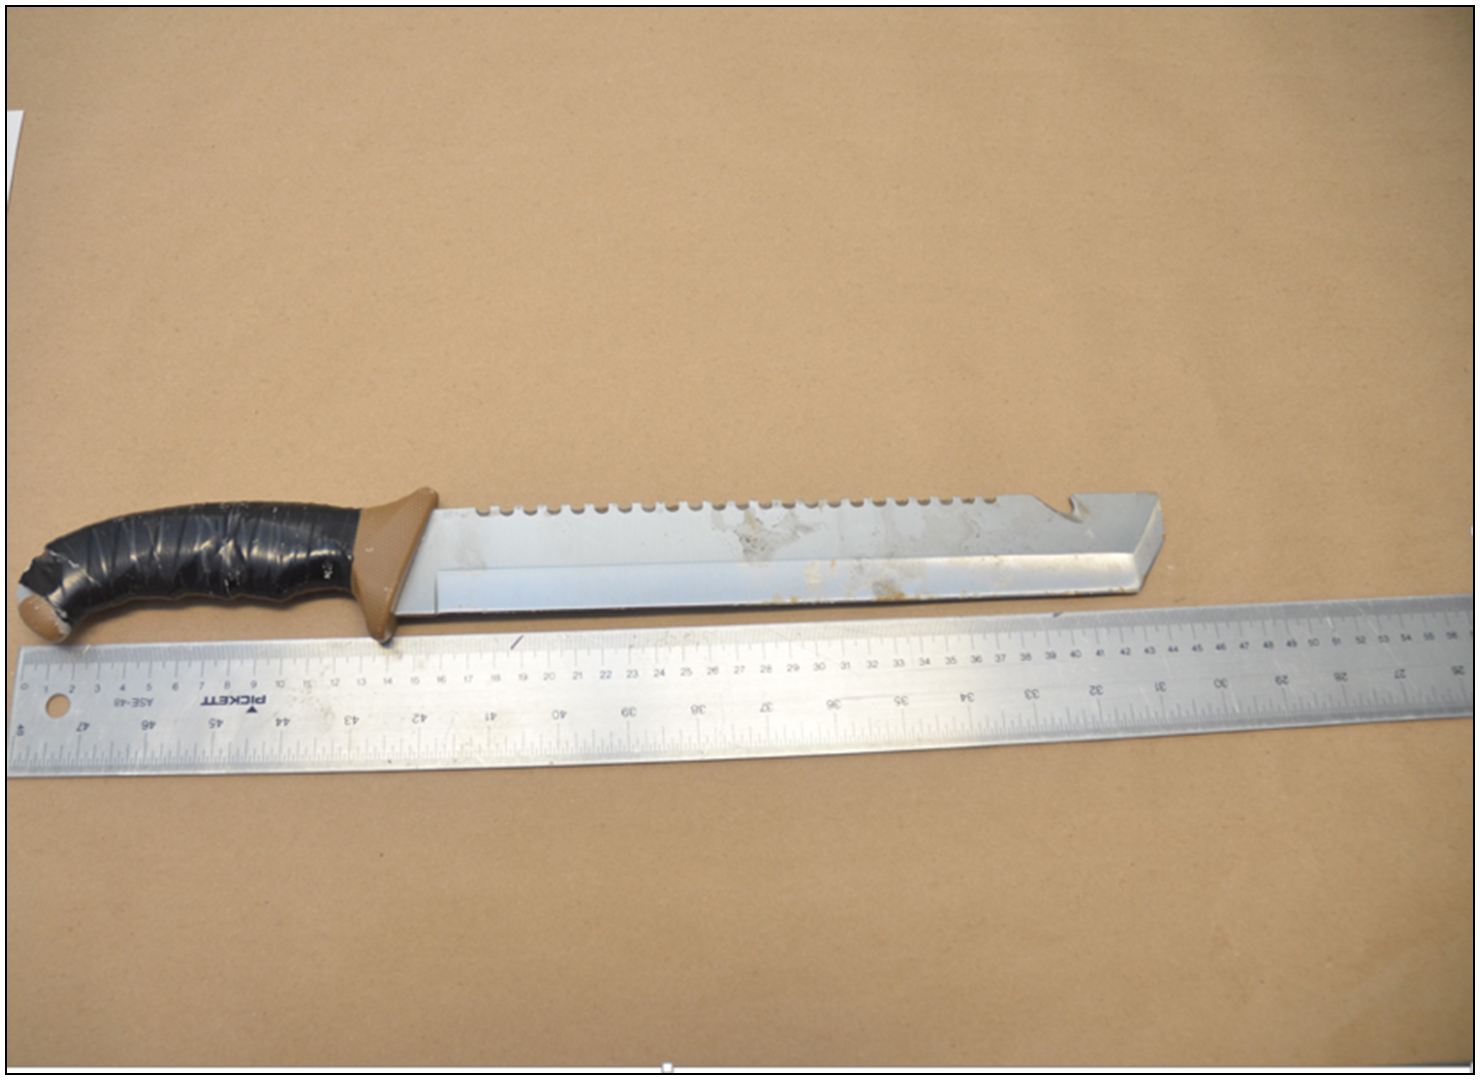 The weapon observed in the Complainant’s possession